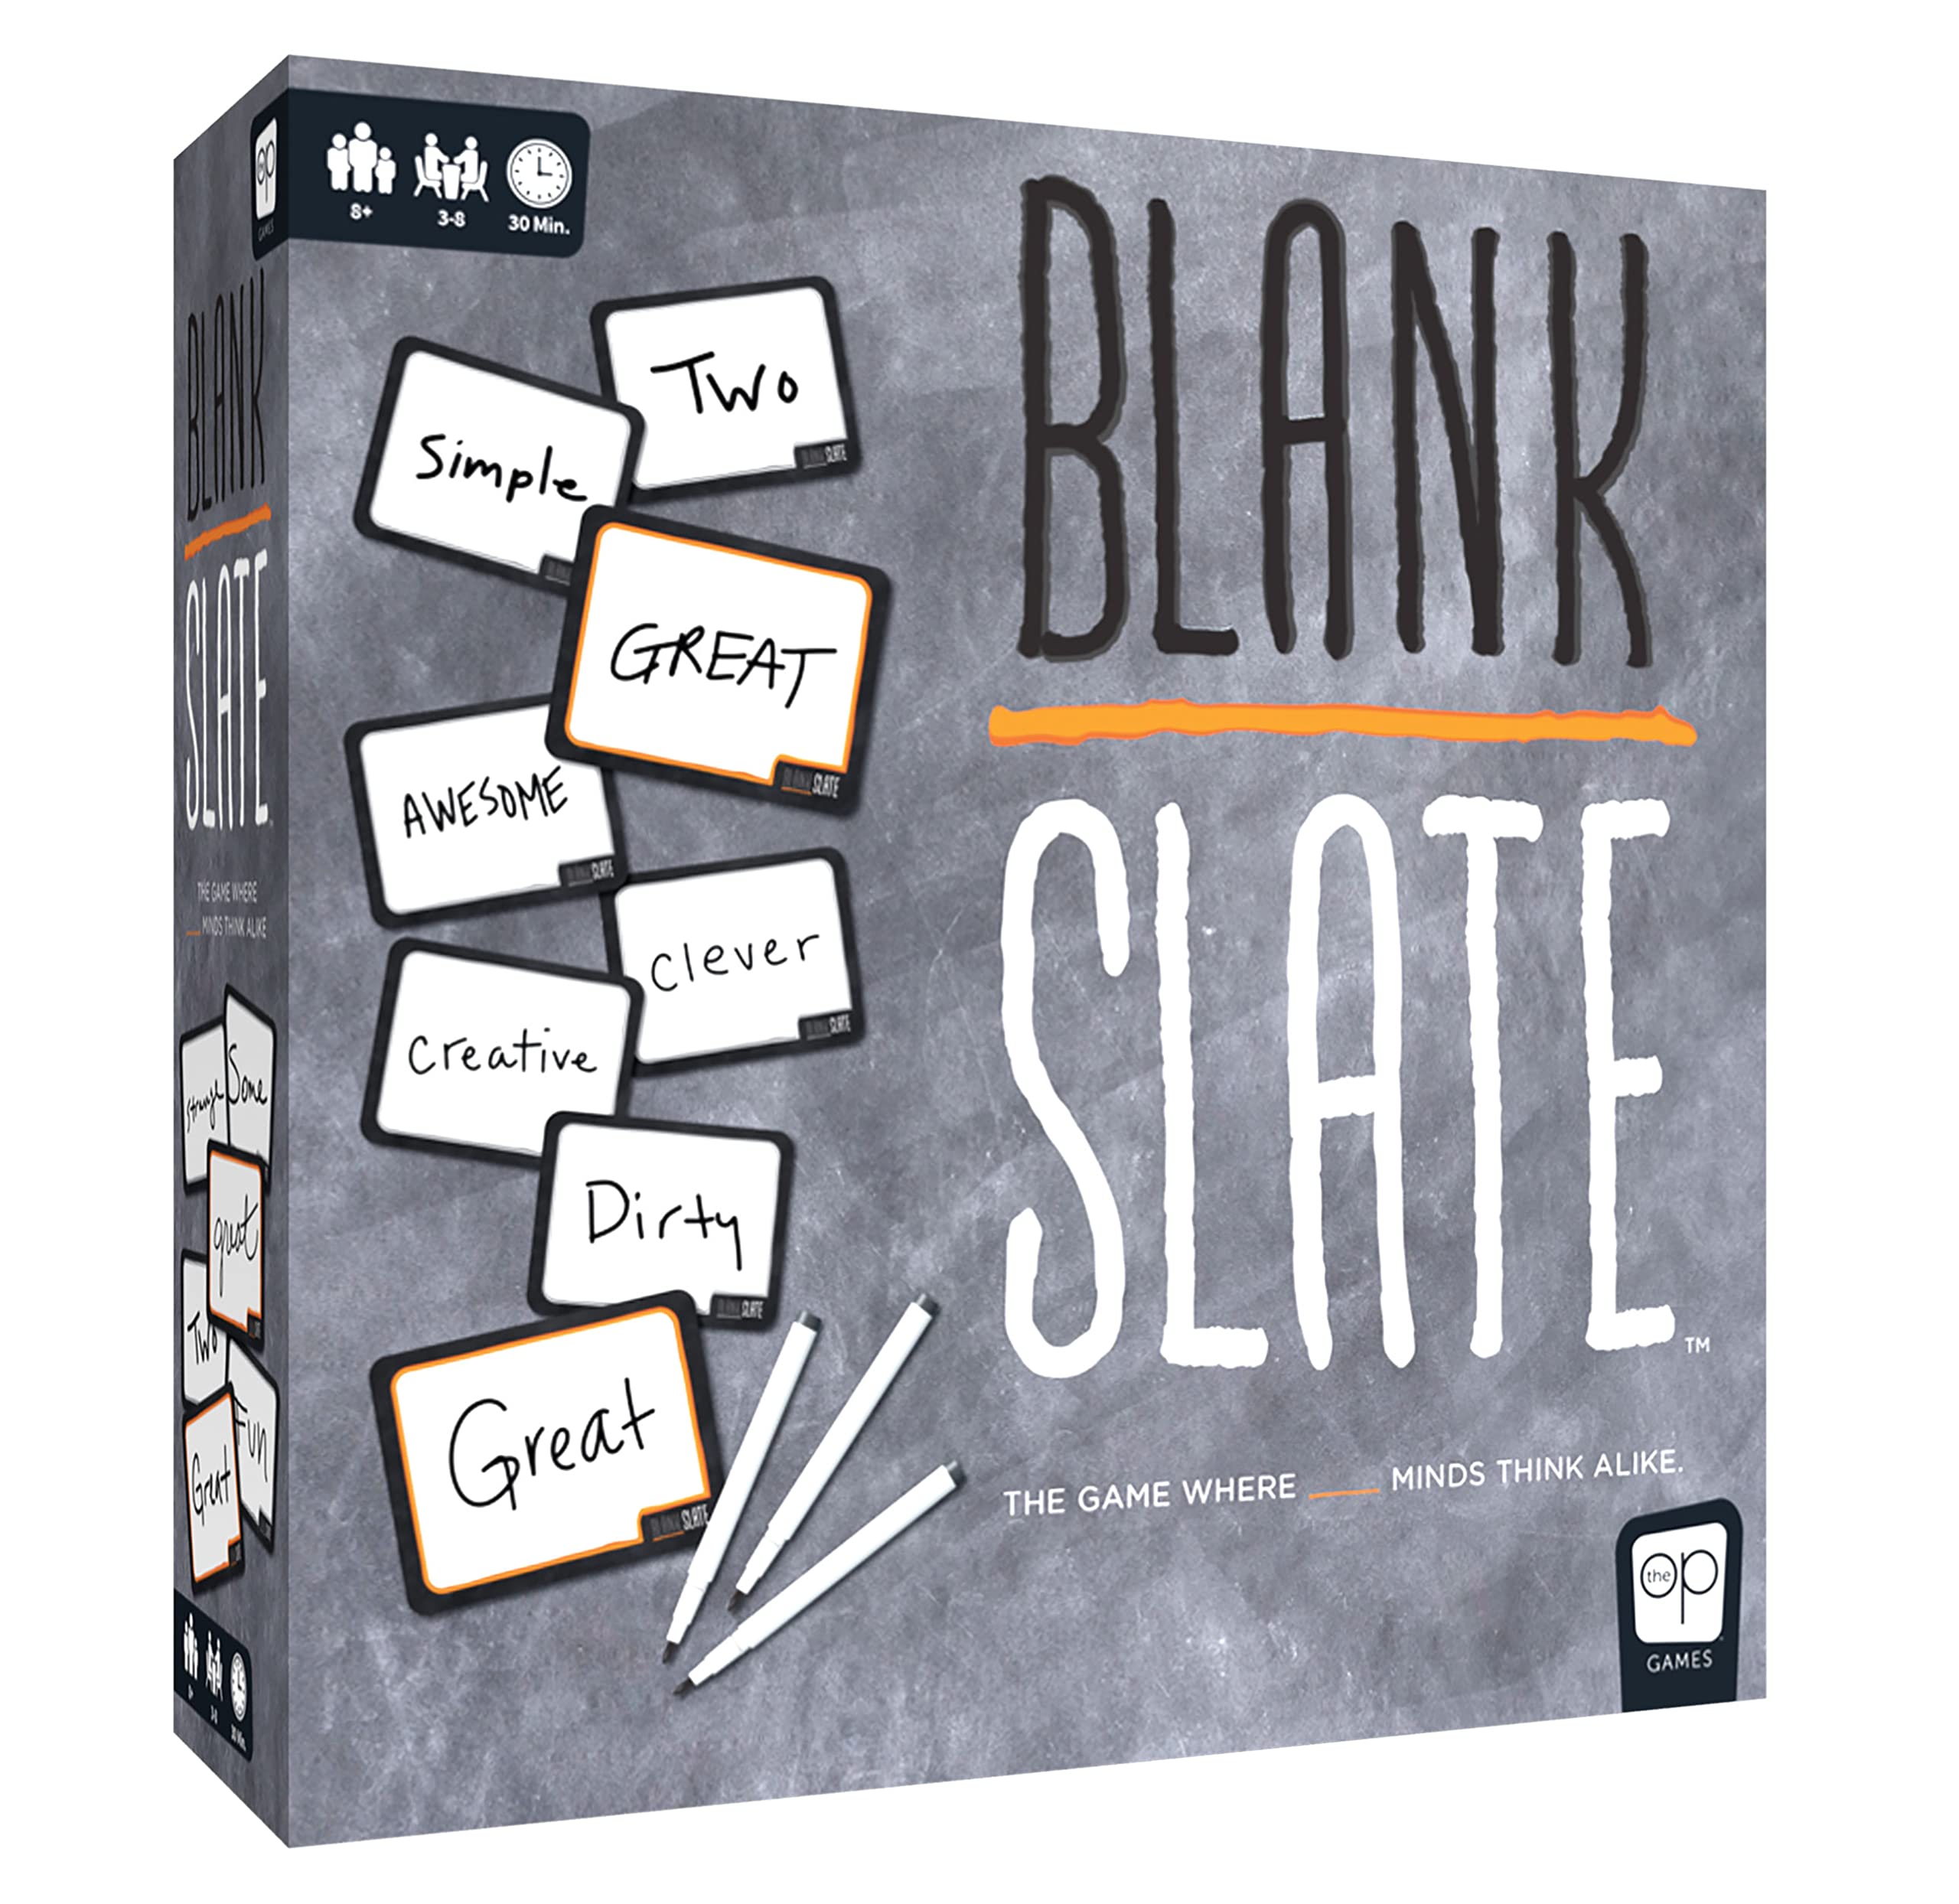 BLANK SLATE™ - The Game Where Great Minds Think Alike | Fun Family Friendly Word Association Party Game, 3 to 8 players